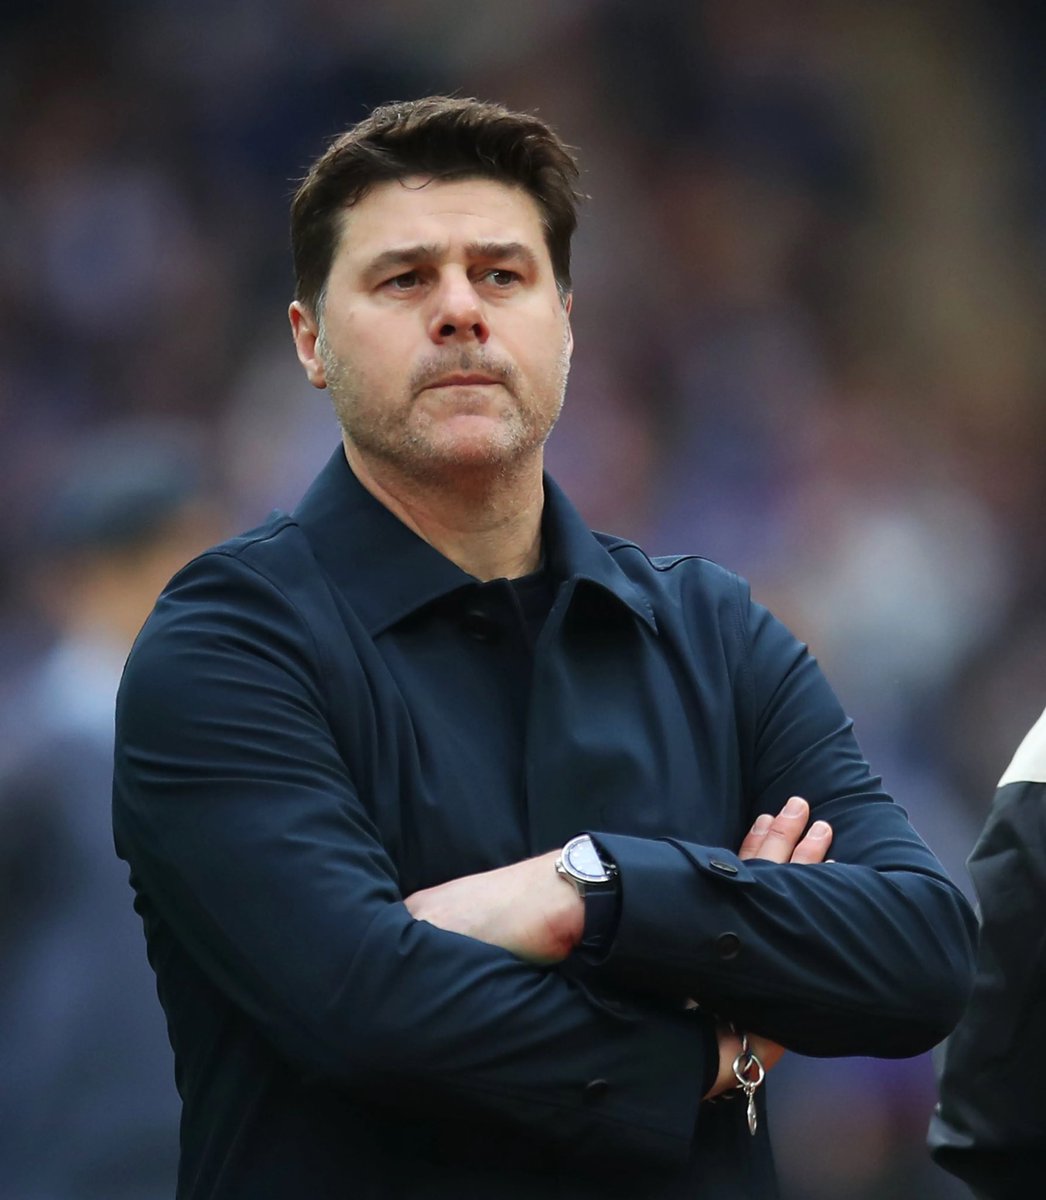 🔵❗️ Pochettino: “I never said I wasn't happy at Chelsea. I never said that. I said maybe I'm happy, maybe I'm not happy”.

“But it's a normal headline. Sometimes it's too much honesty speaking. It's not a problem. I have one year left on my contract”.